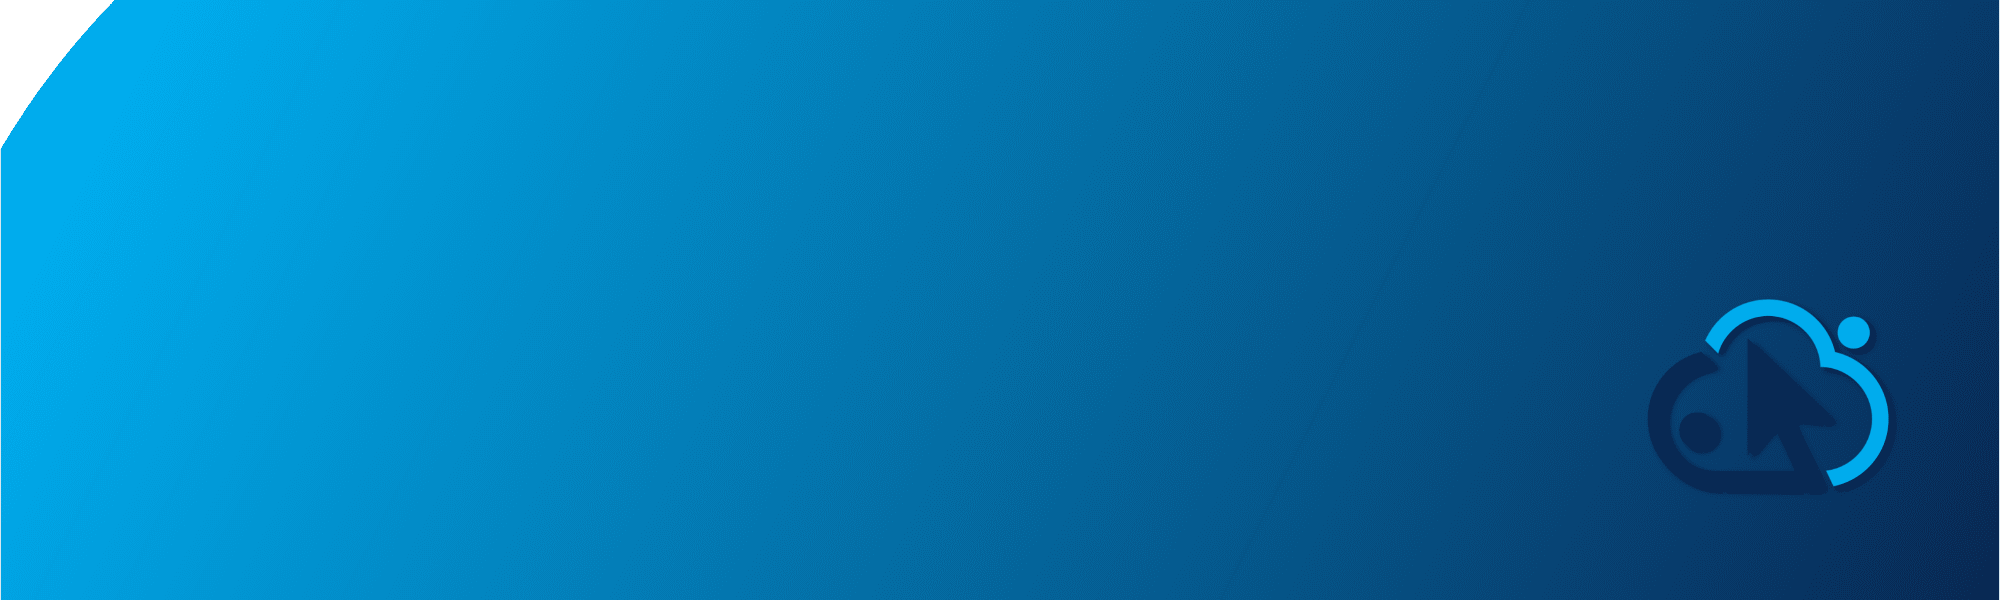 Blue and white header with Suite Select Logo